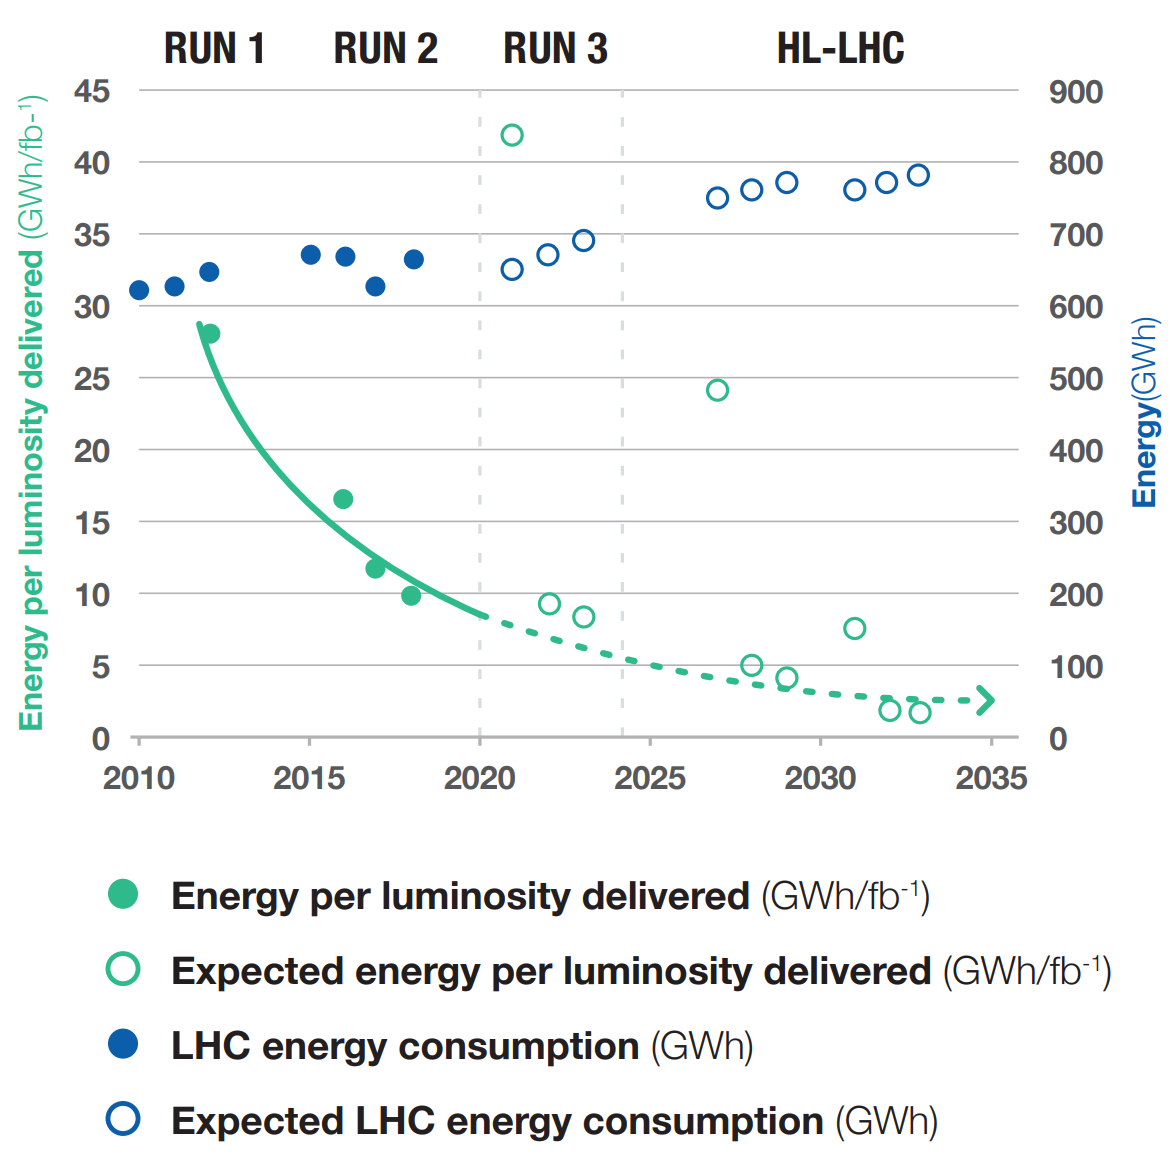 Energy used per luminosity delivered 2010-2035